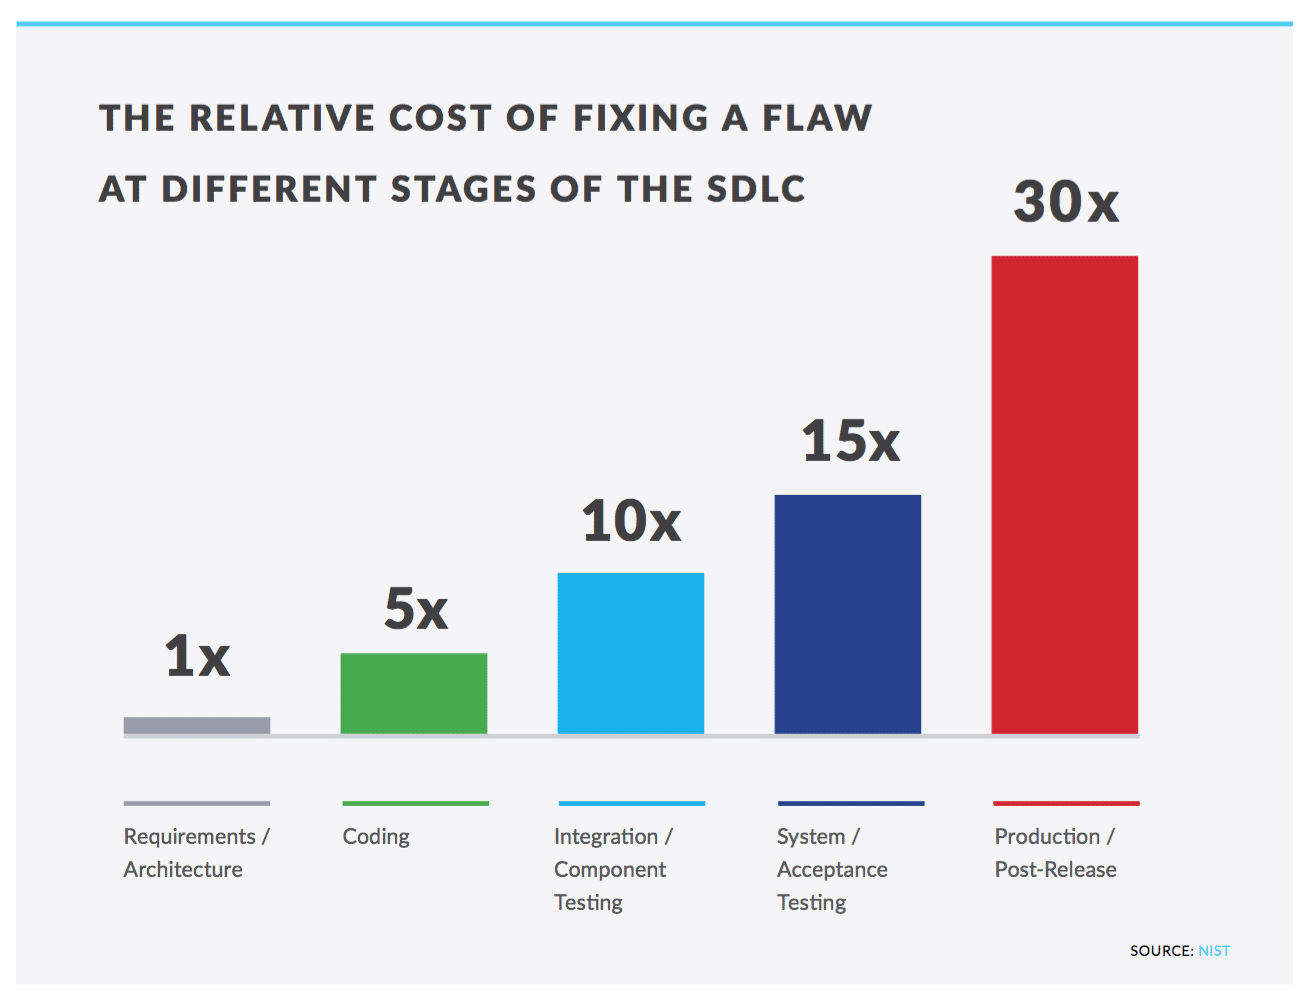 NIST: The relative cost of fixing a flaw at different stages of the SLDC